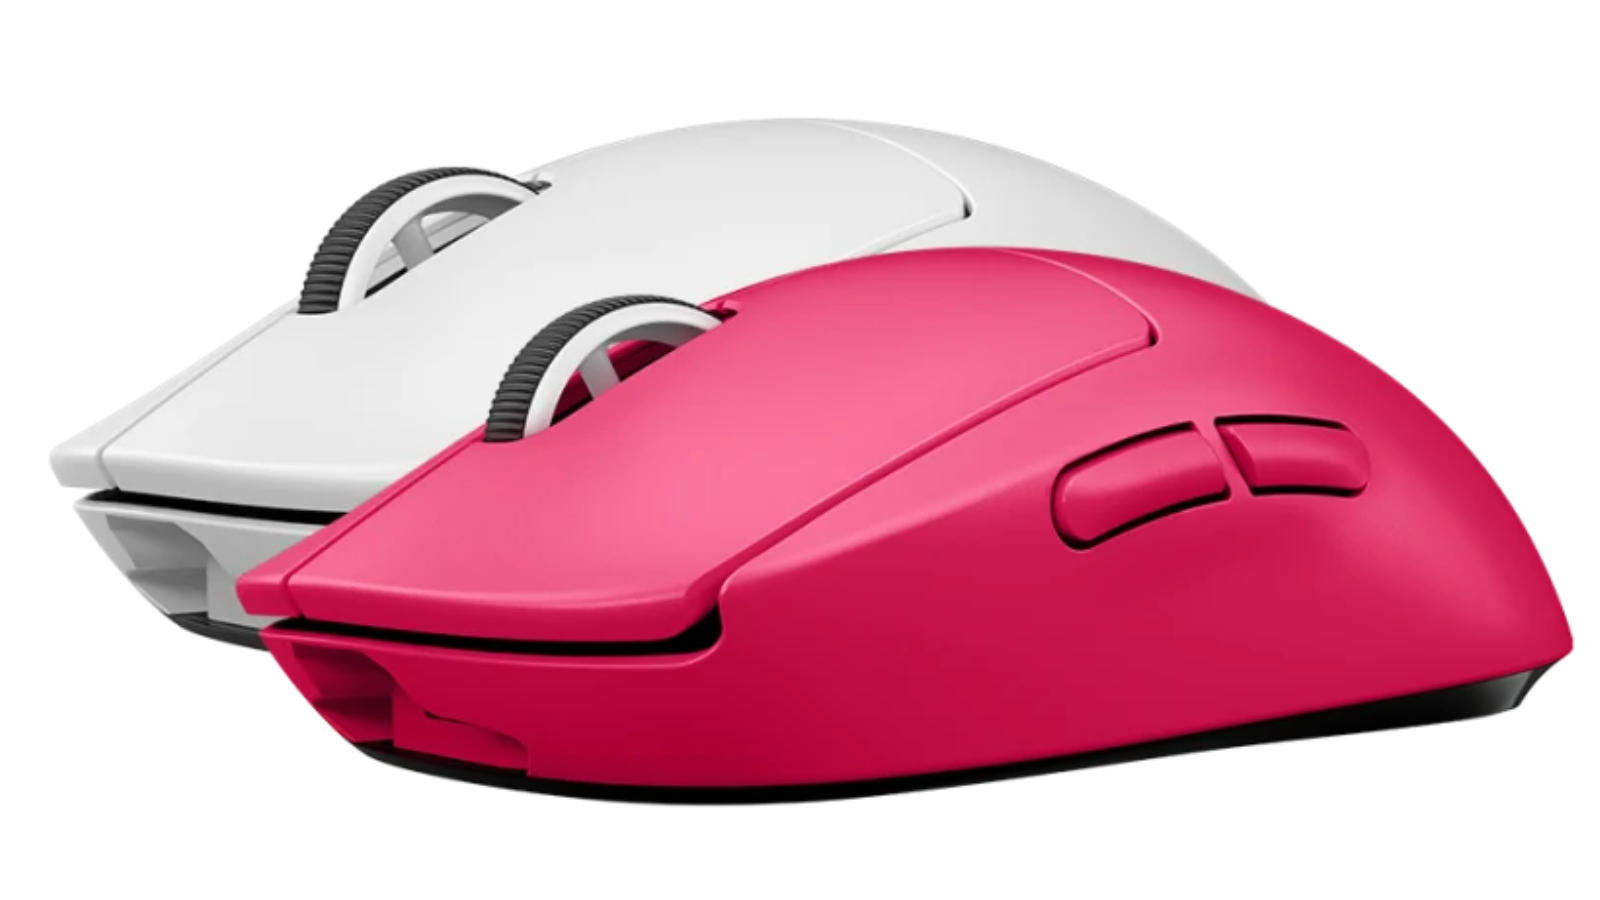 Logitech G Pro X Superlight in white and magenta against a white background.